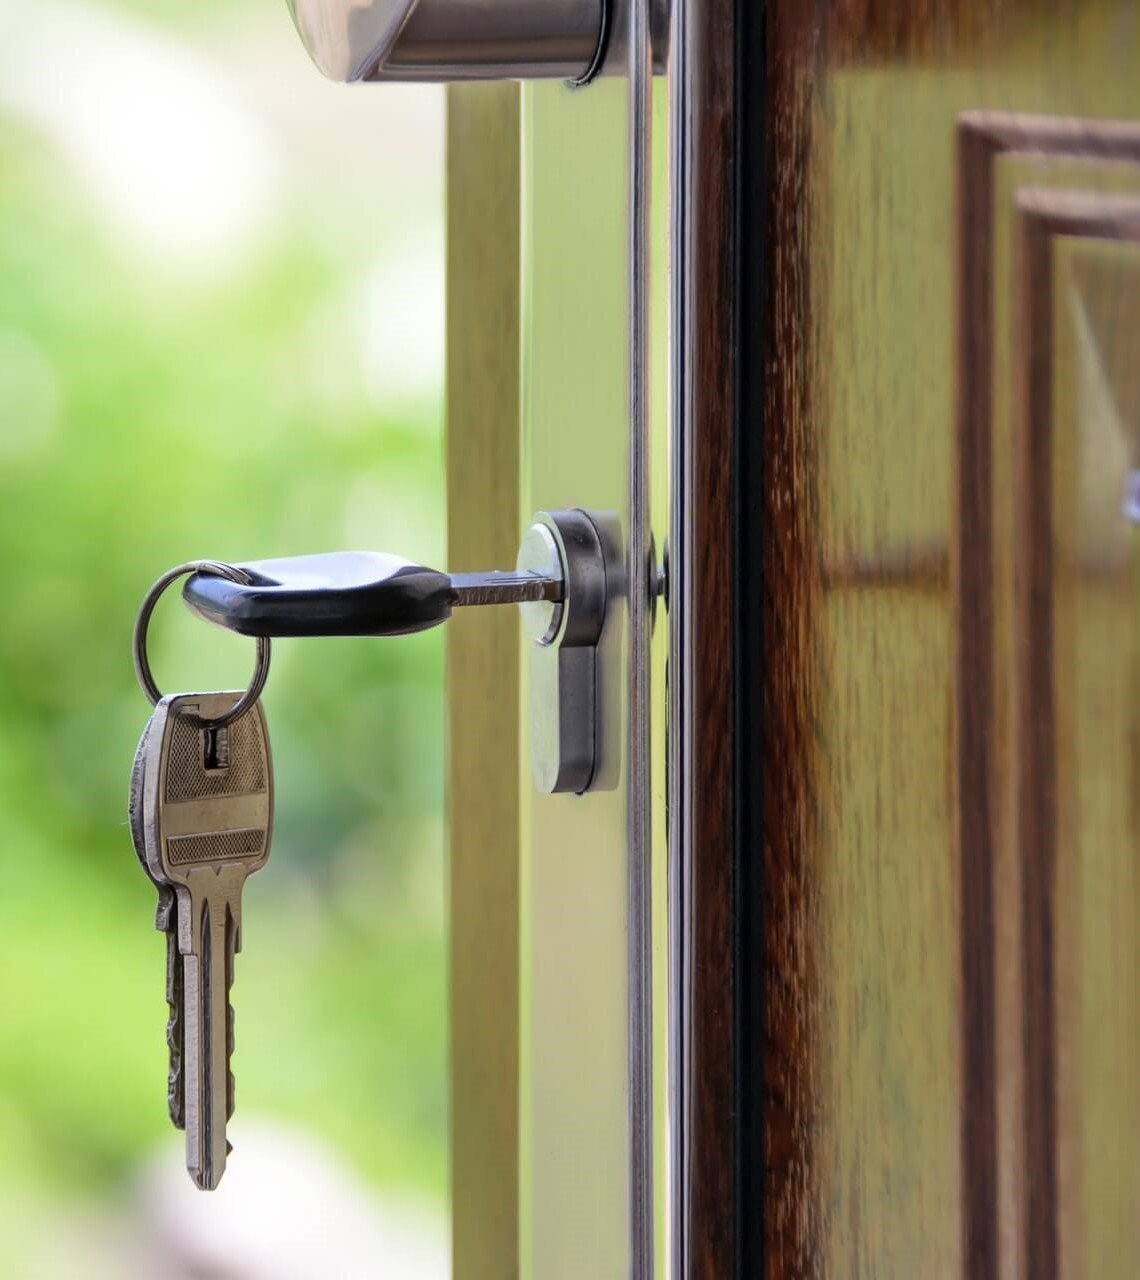 With more than a decade’s experience in the field, the local locksmith based in Kansas City is a trusted name among the people of the region on the back of its top-quality services that are also affordably priced.